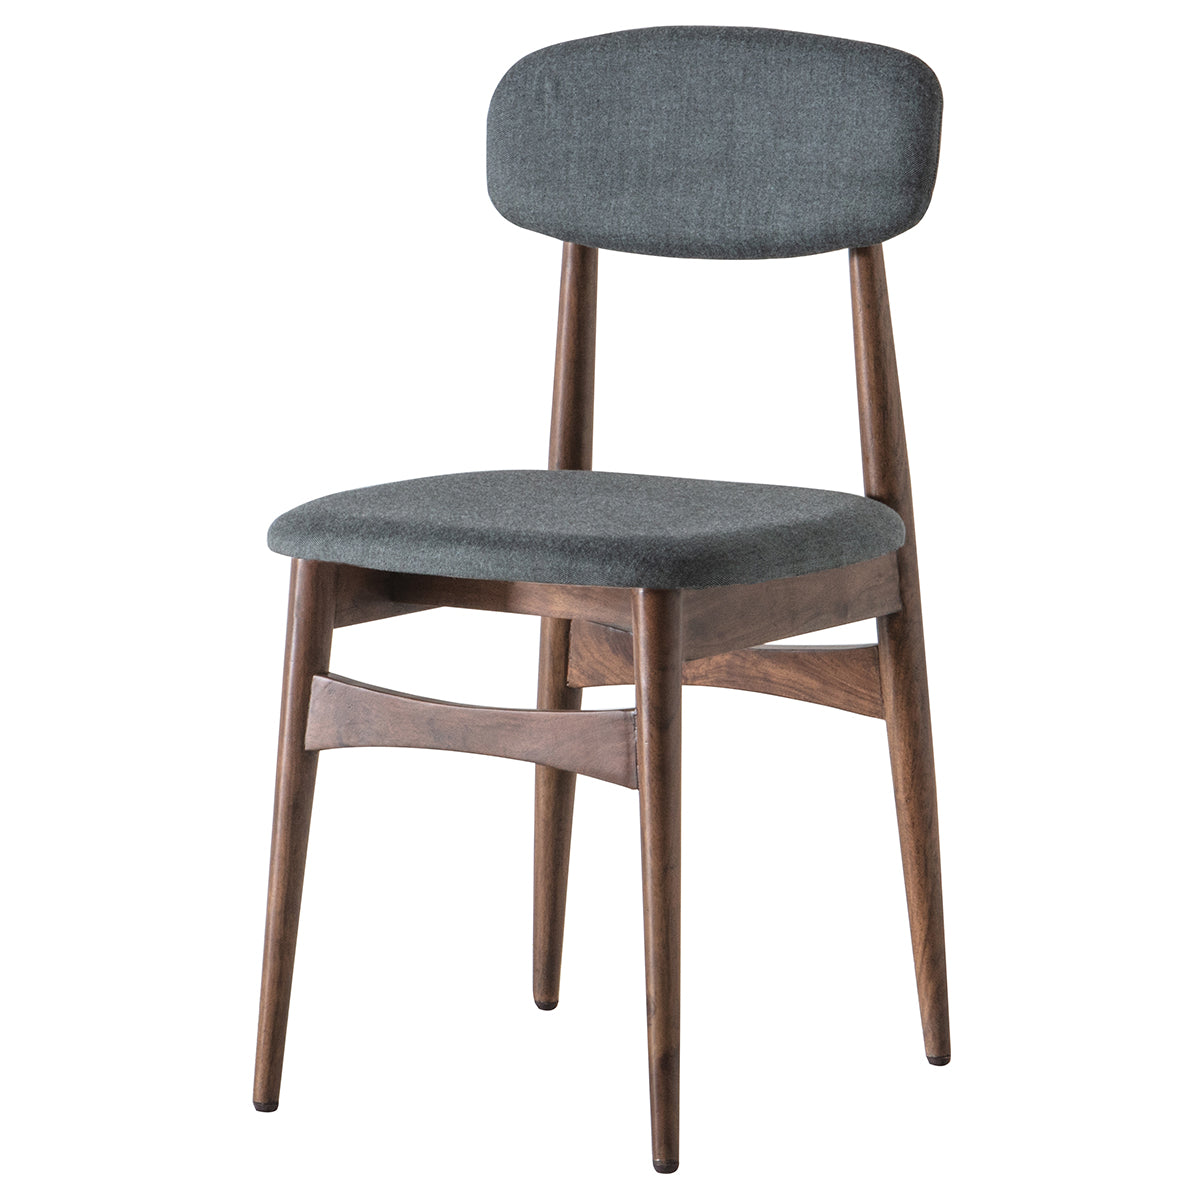 Minimalist elegant dining chair with tapered wooden legs and padded seat and backrest. Product only picture. Side view